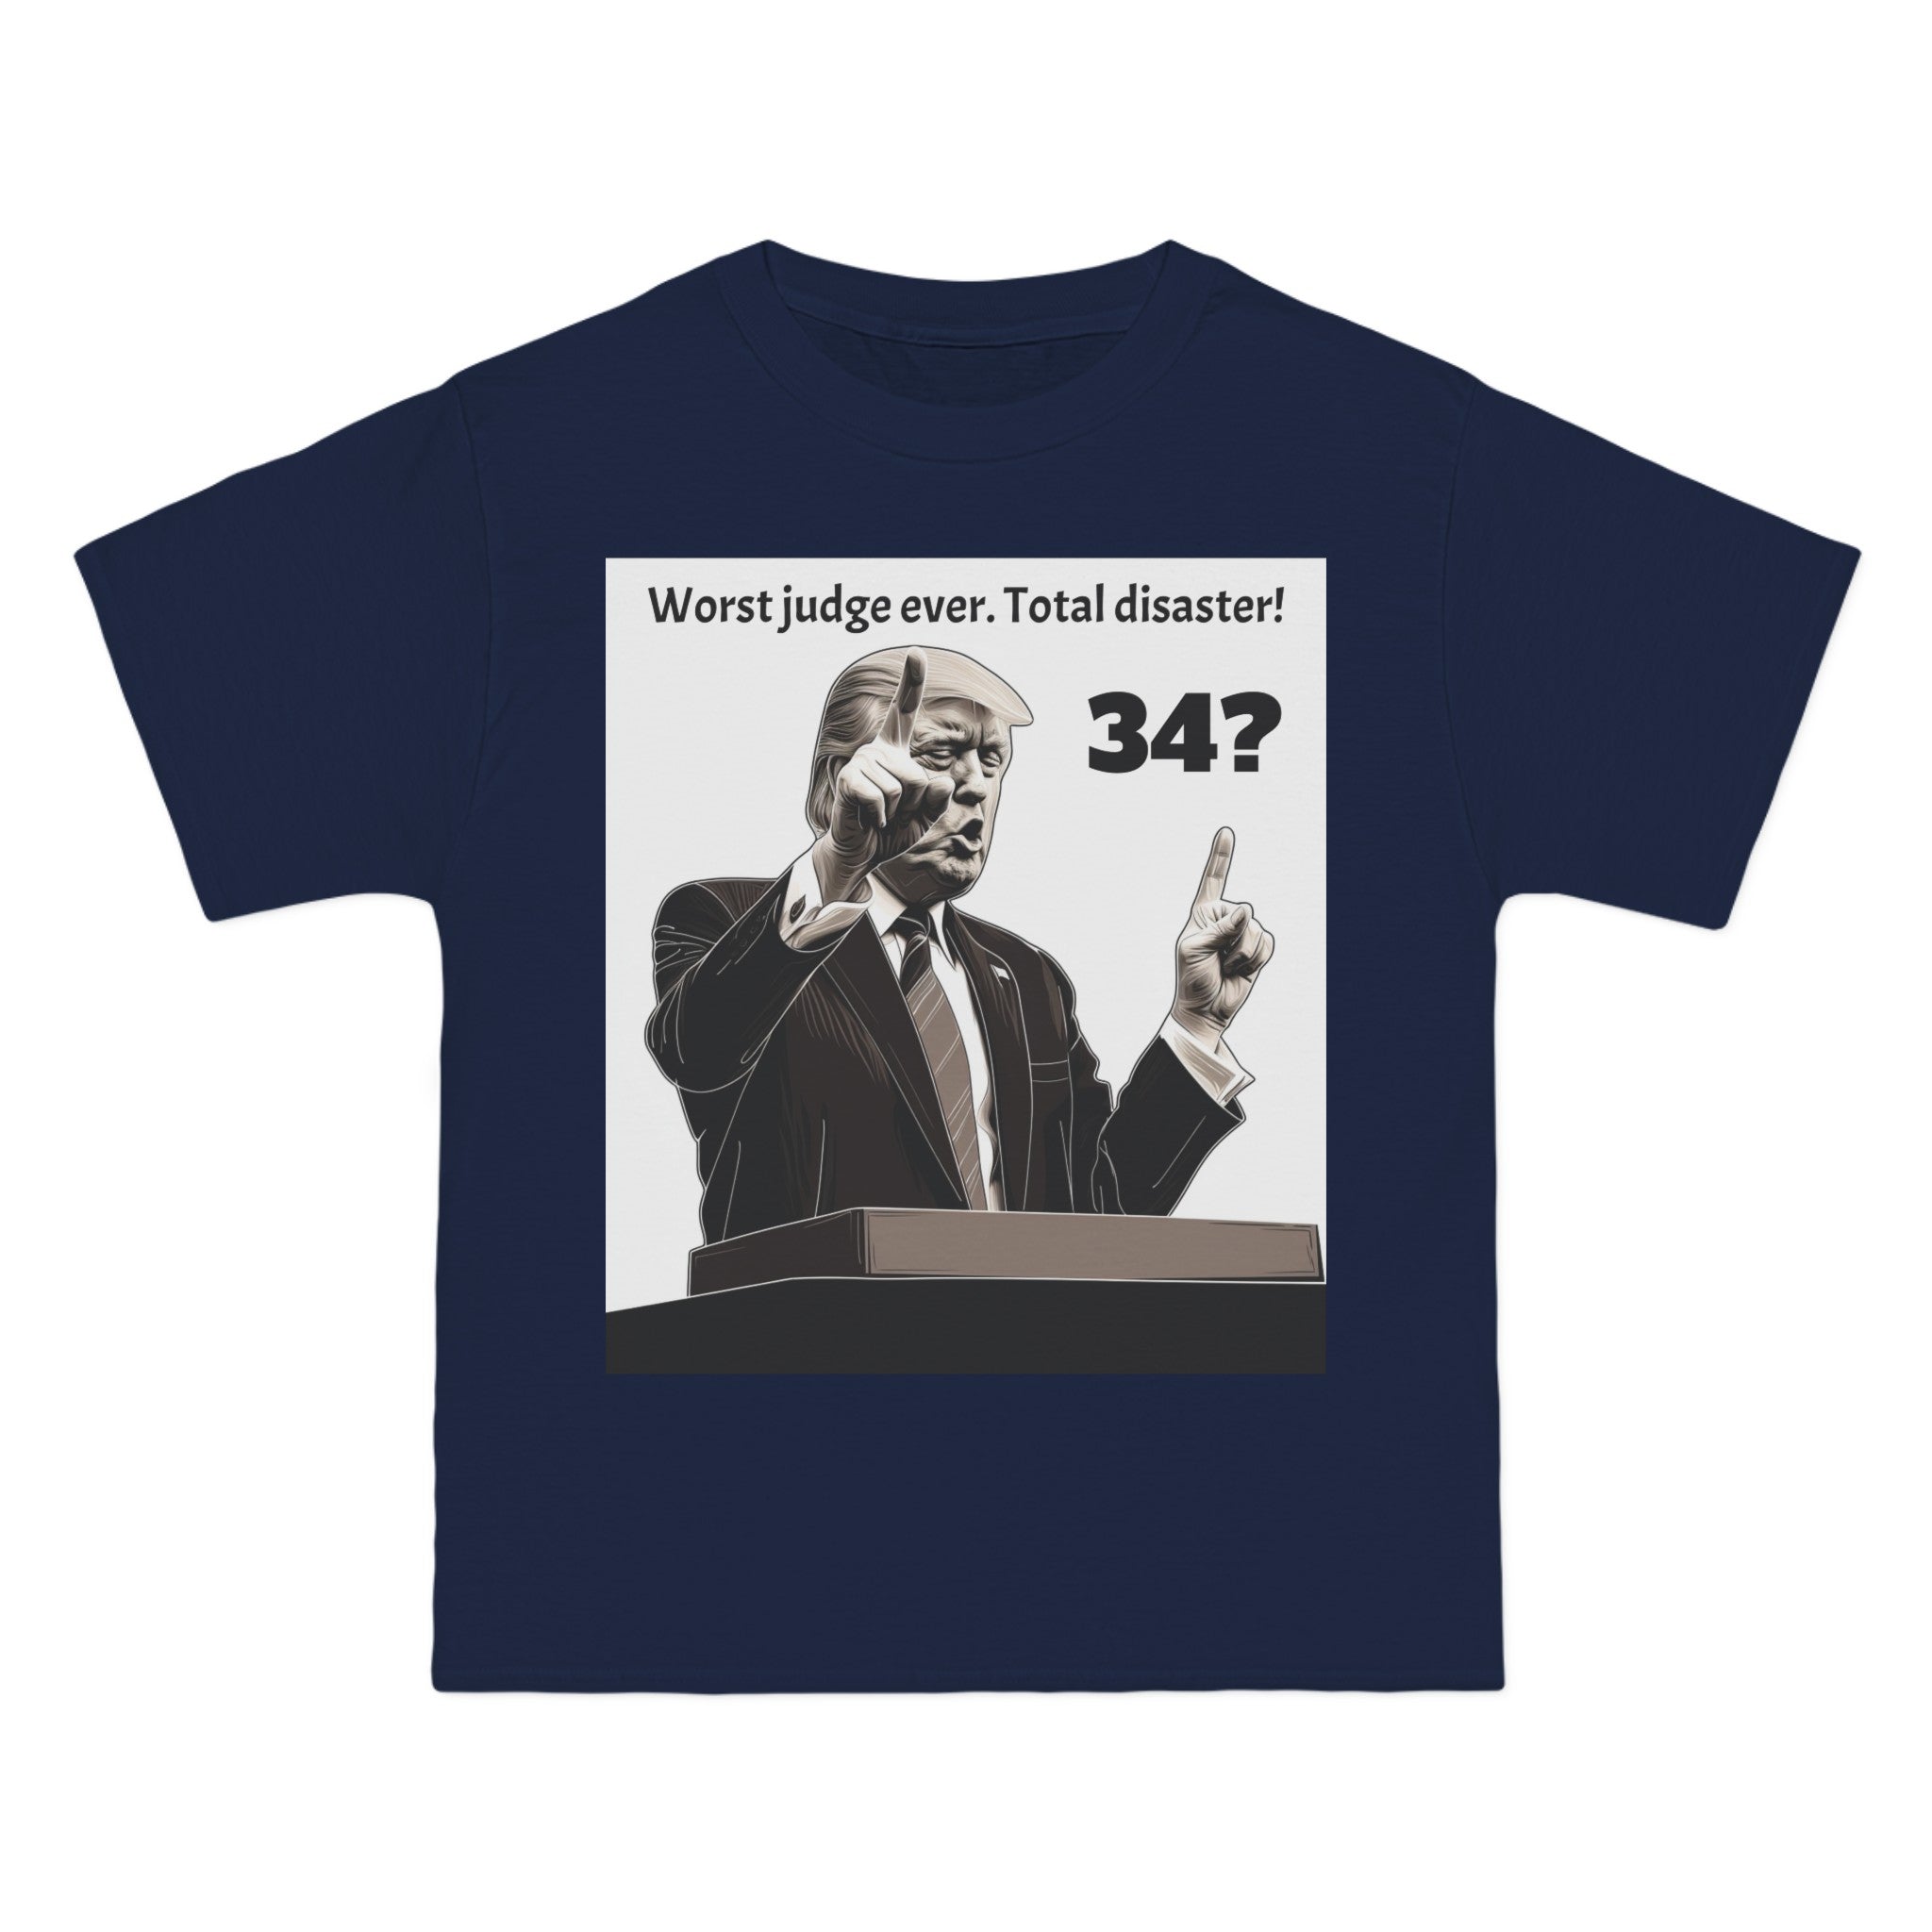 The image displays a robust, comfortable Beefy-T® short-sleeve t-shirt in a classic color. The front is emblazoned with the phrase "34 Counts? Worst Judge Ever" in bold, attention-grabbing typography, reflecting a satirical take on political narratives. The shirt’s quality and fit are highlighted, promising both style and comfort for the politically aware.